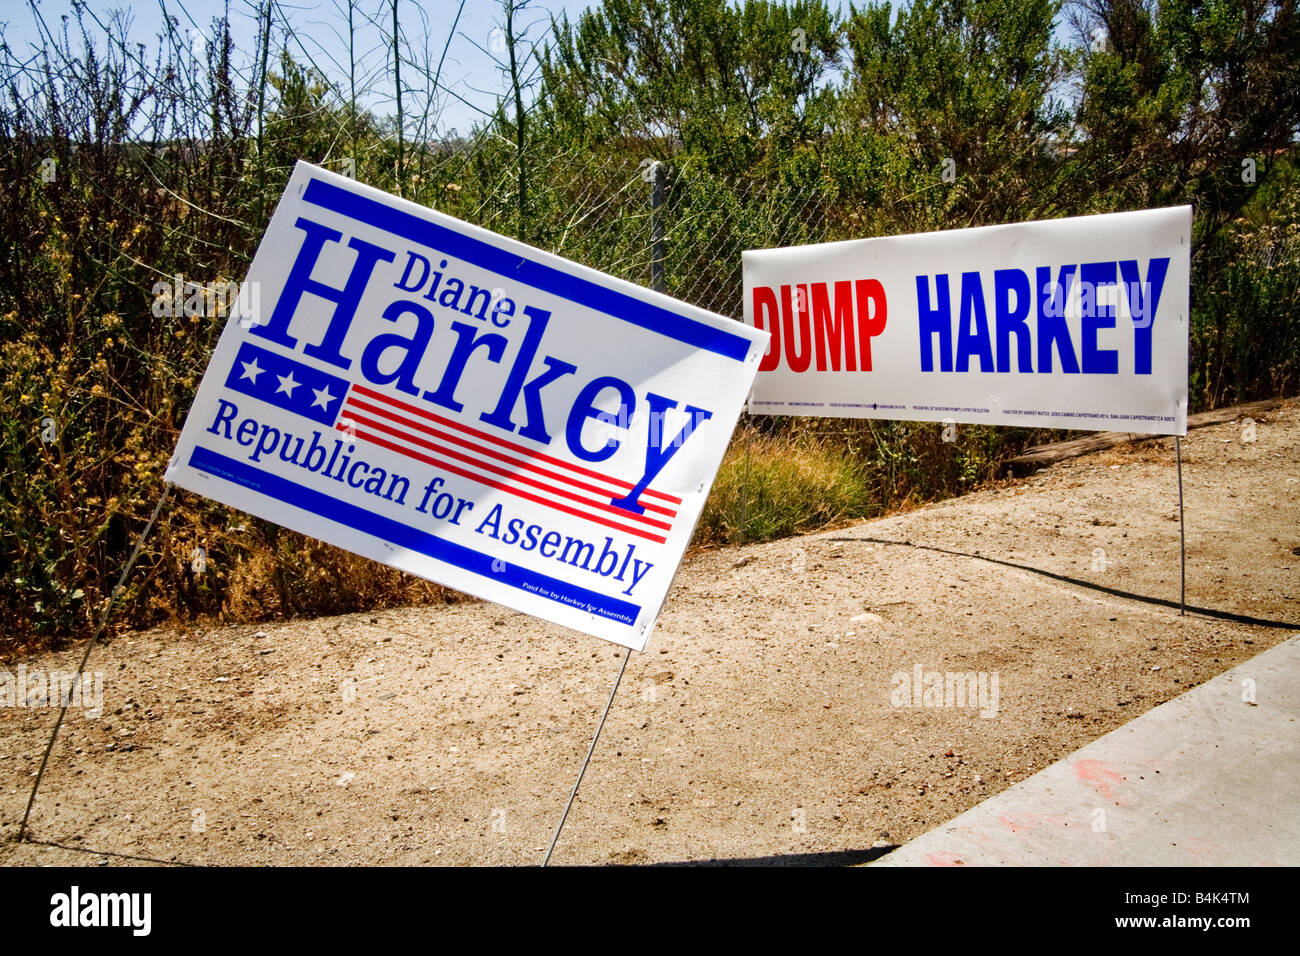 A local candidate s campaign sign in Laguna Niguel CA is ironically juxtaposed with a sign placed later that opposes her candida Stock Photo